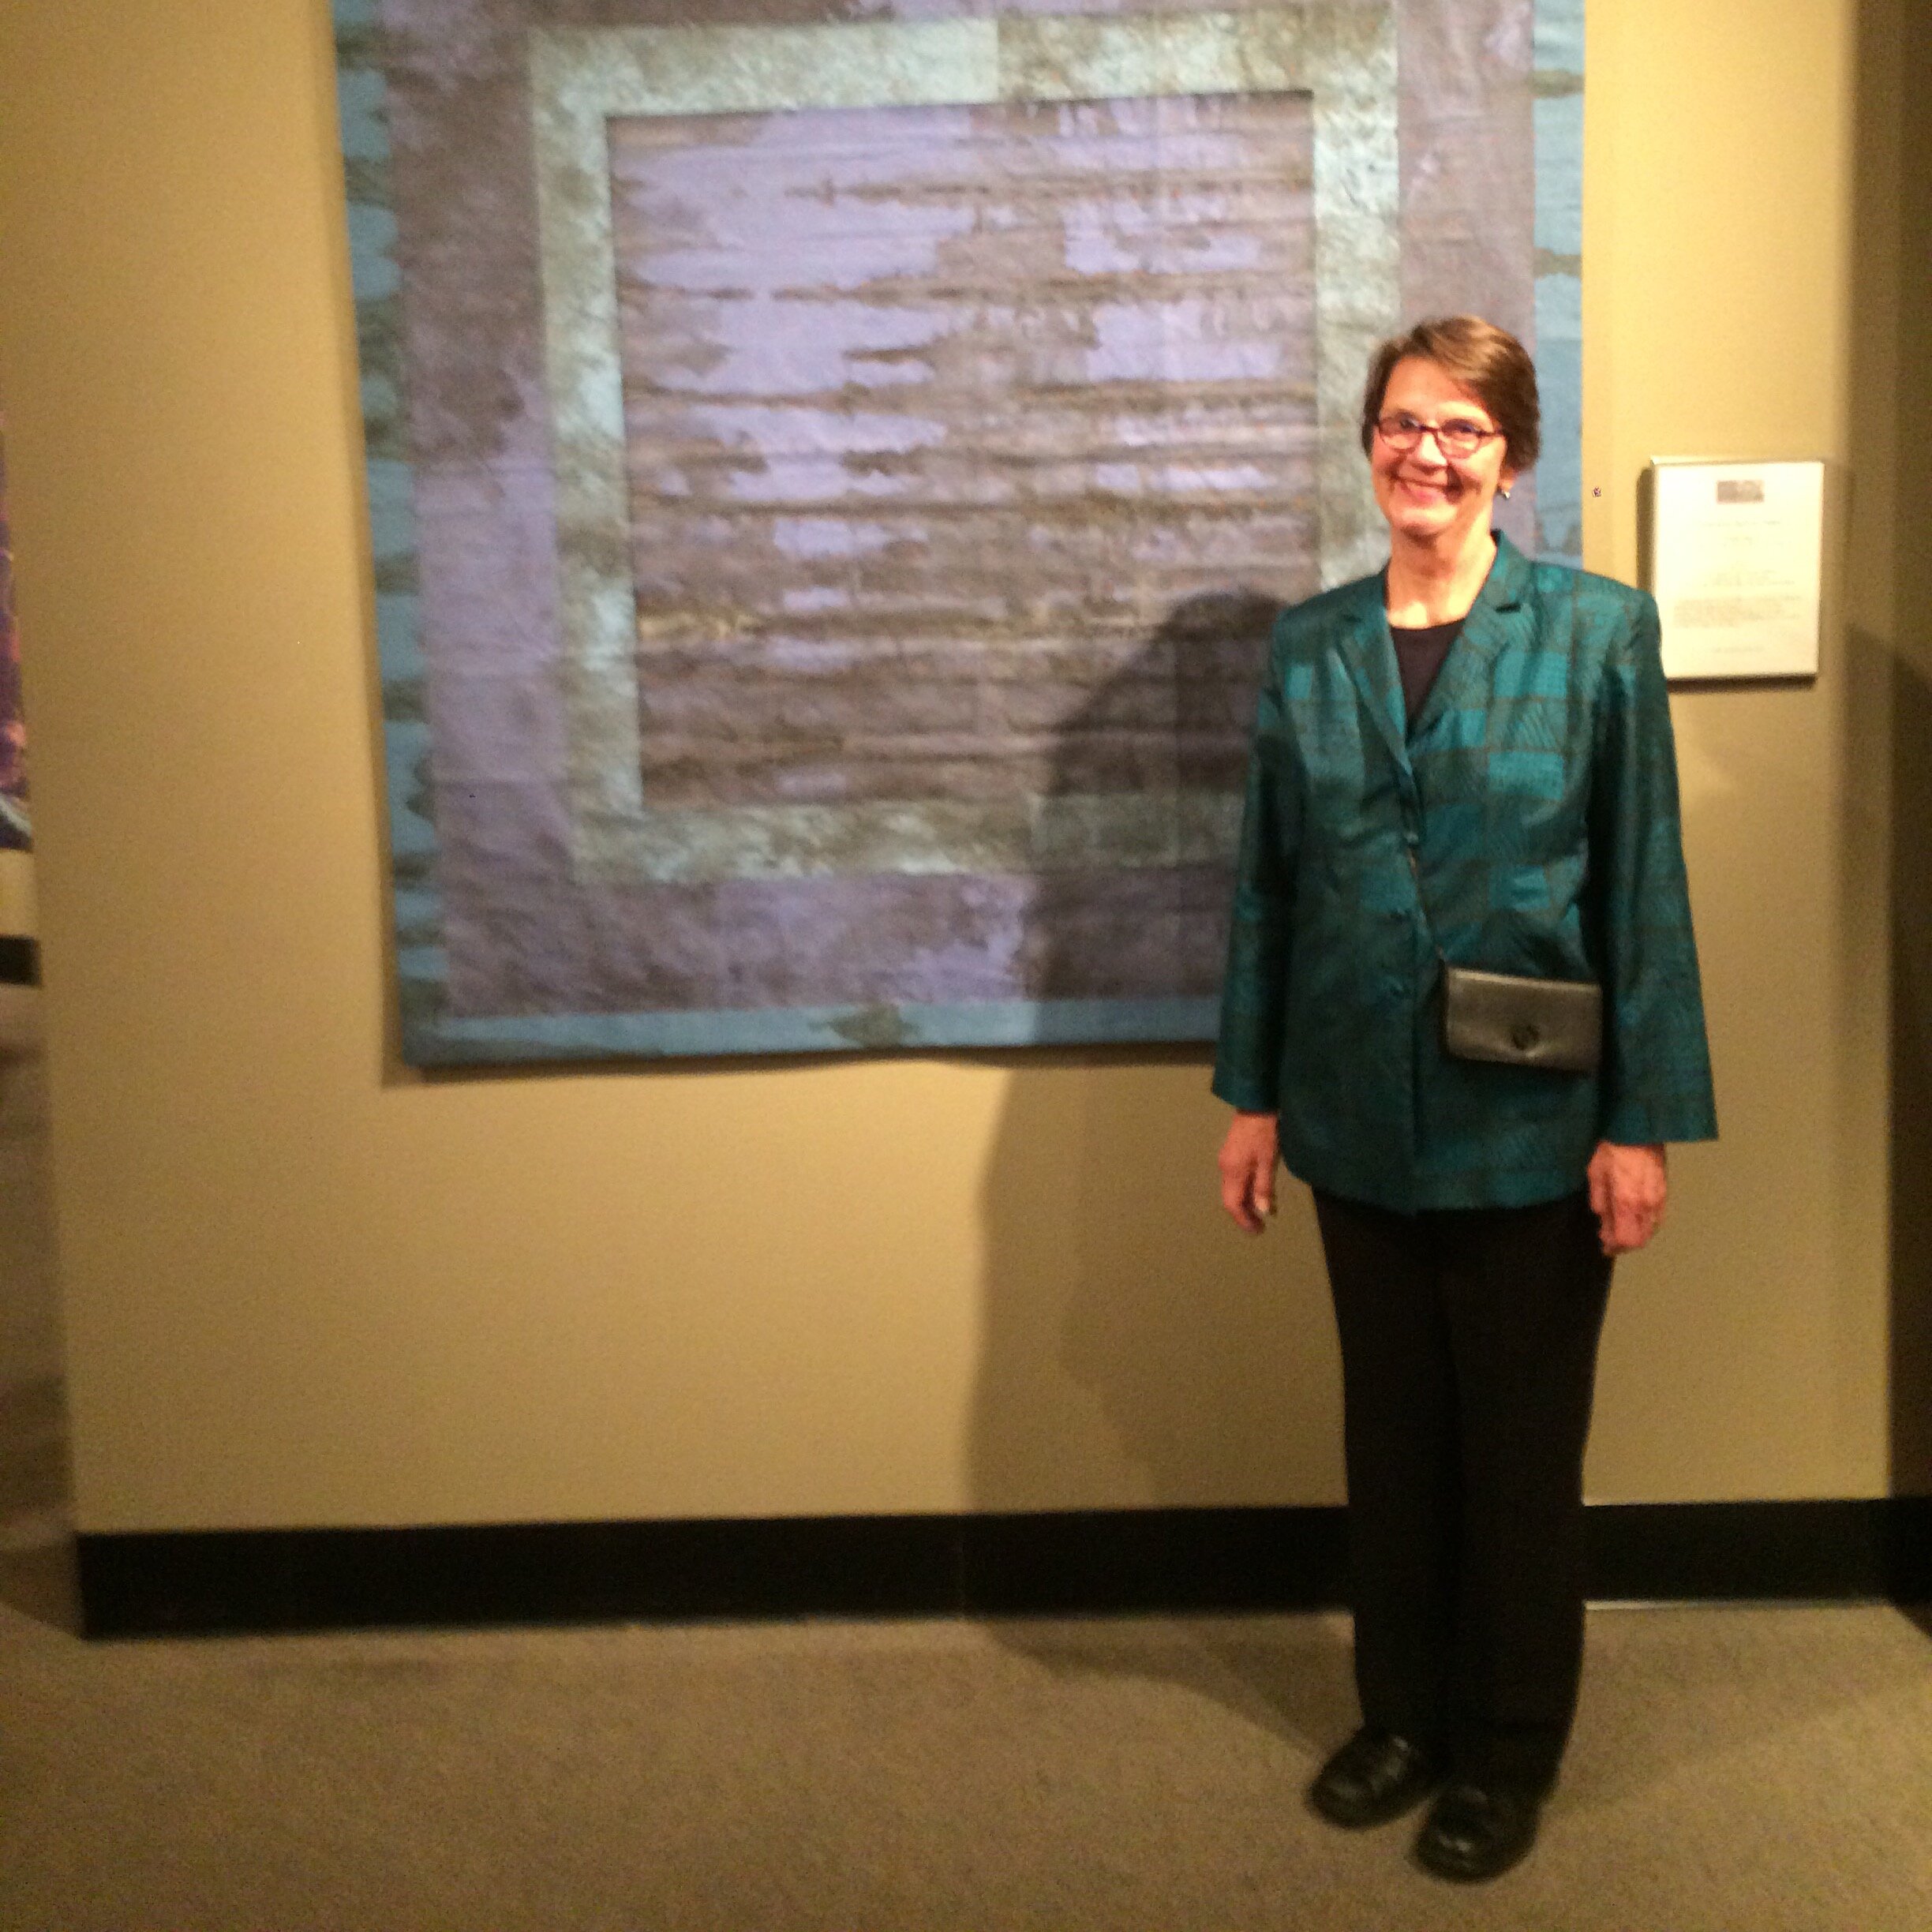 Textile juried is ‘Cremation quilt for Poppa’ made from medical wrapping cloths, dyed &amp; hand stitched.